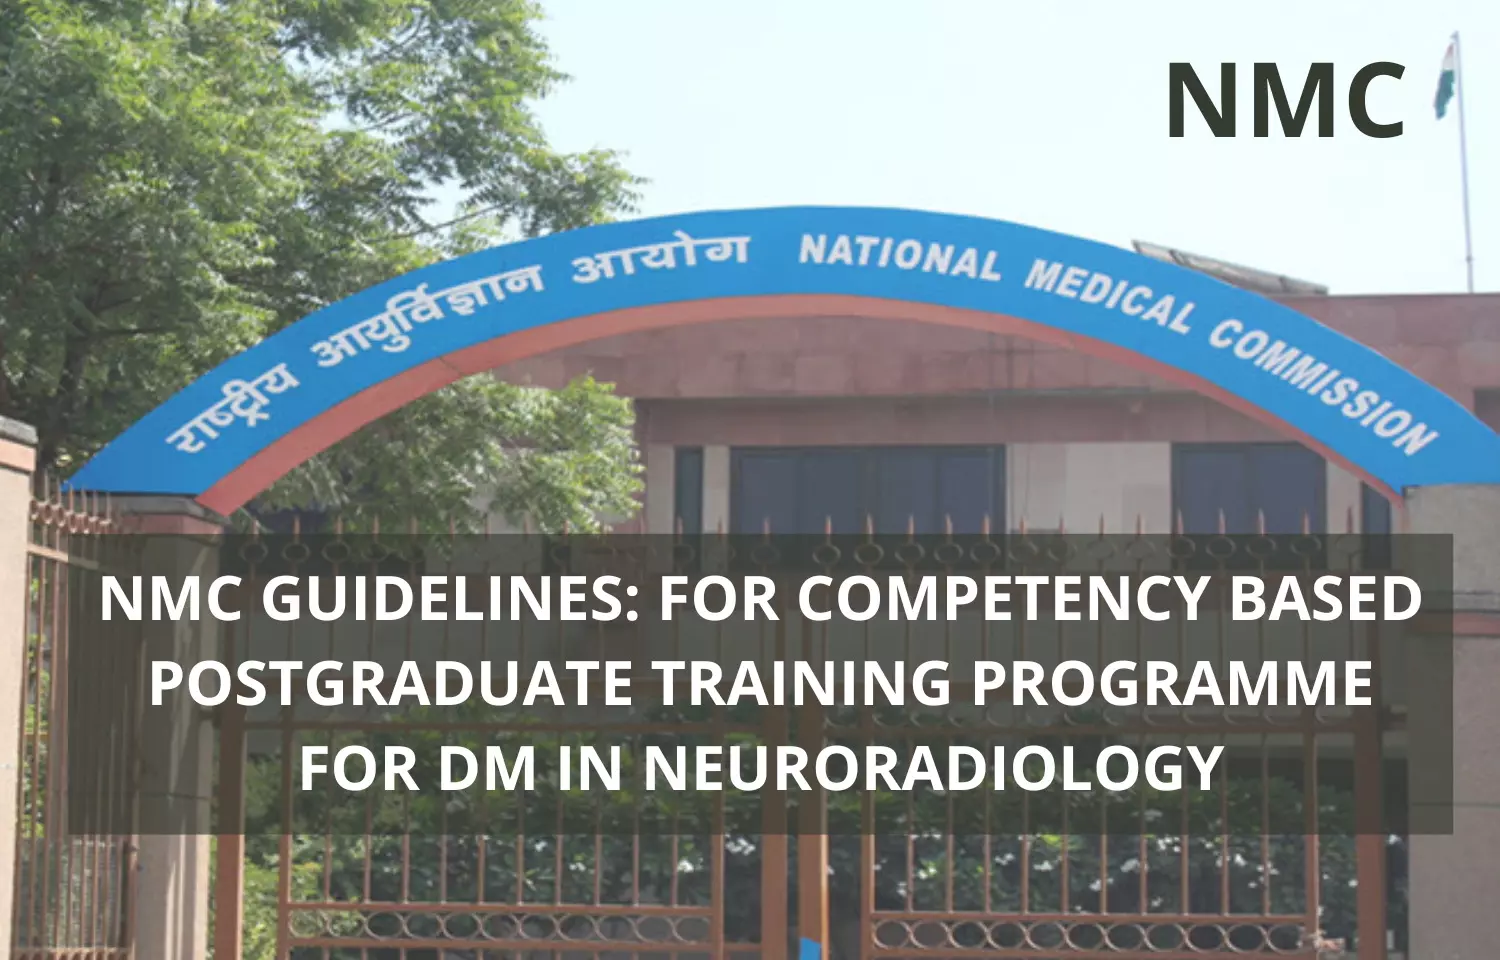 NMC Guidelines For Competency-Based Training Programme For DM Neuroradiology